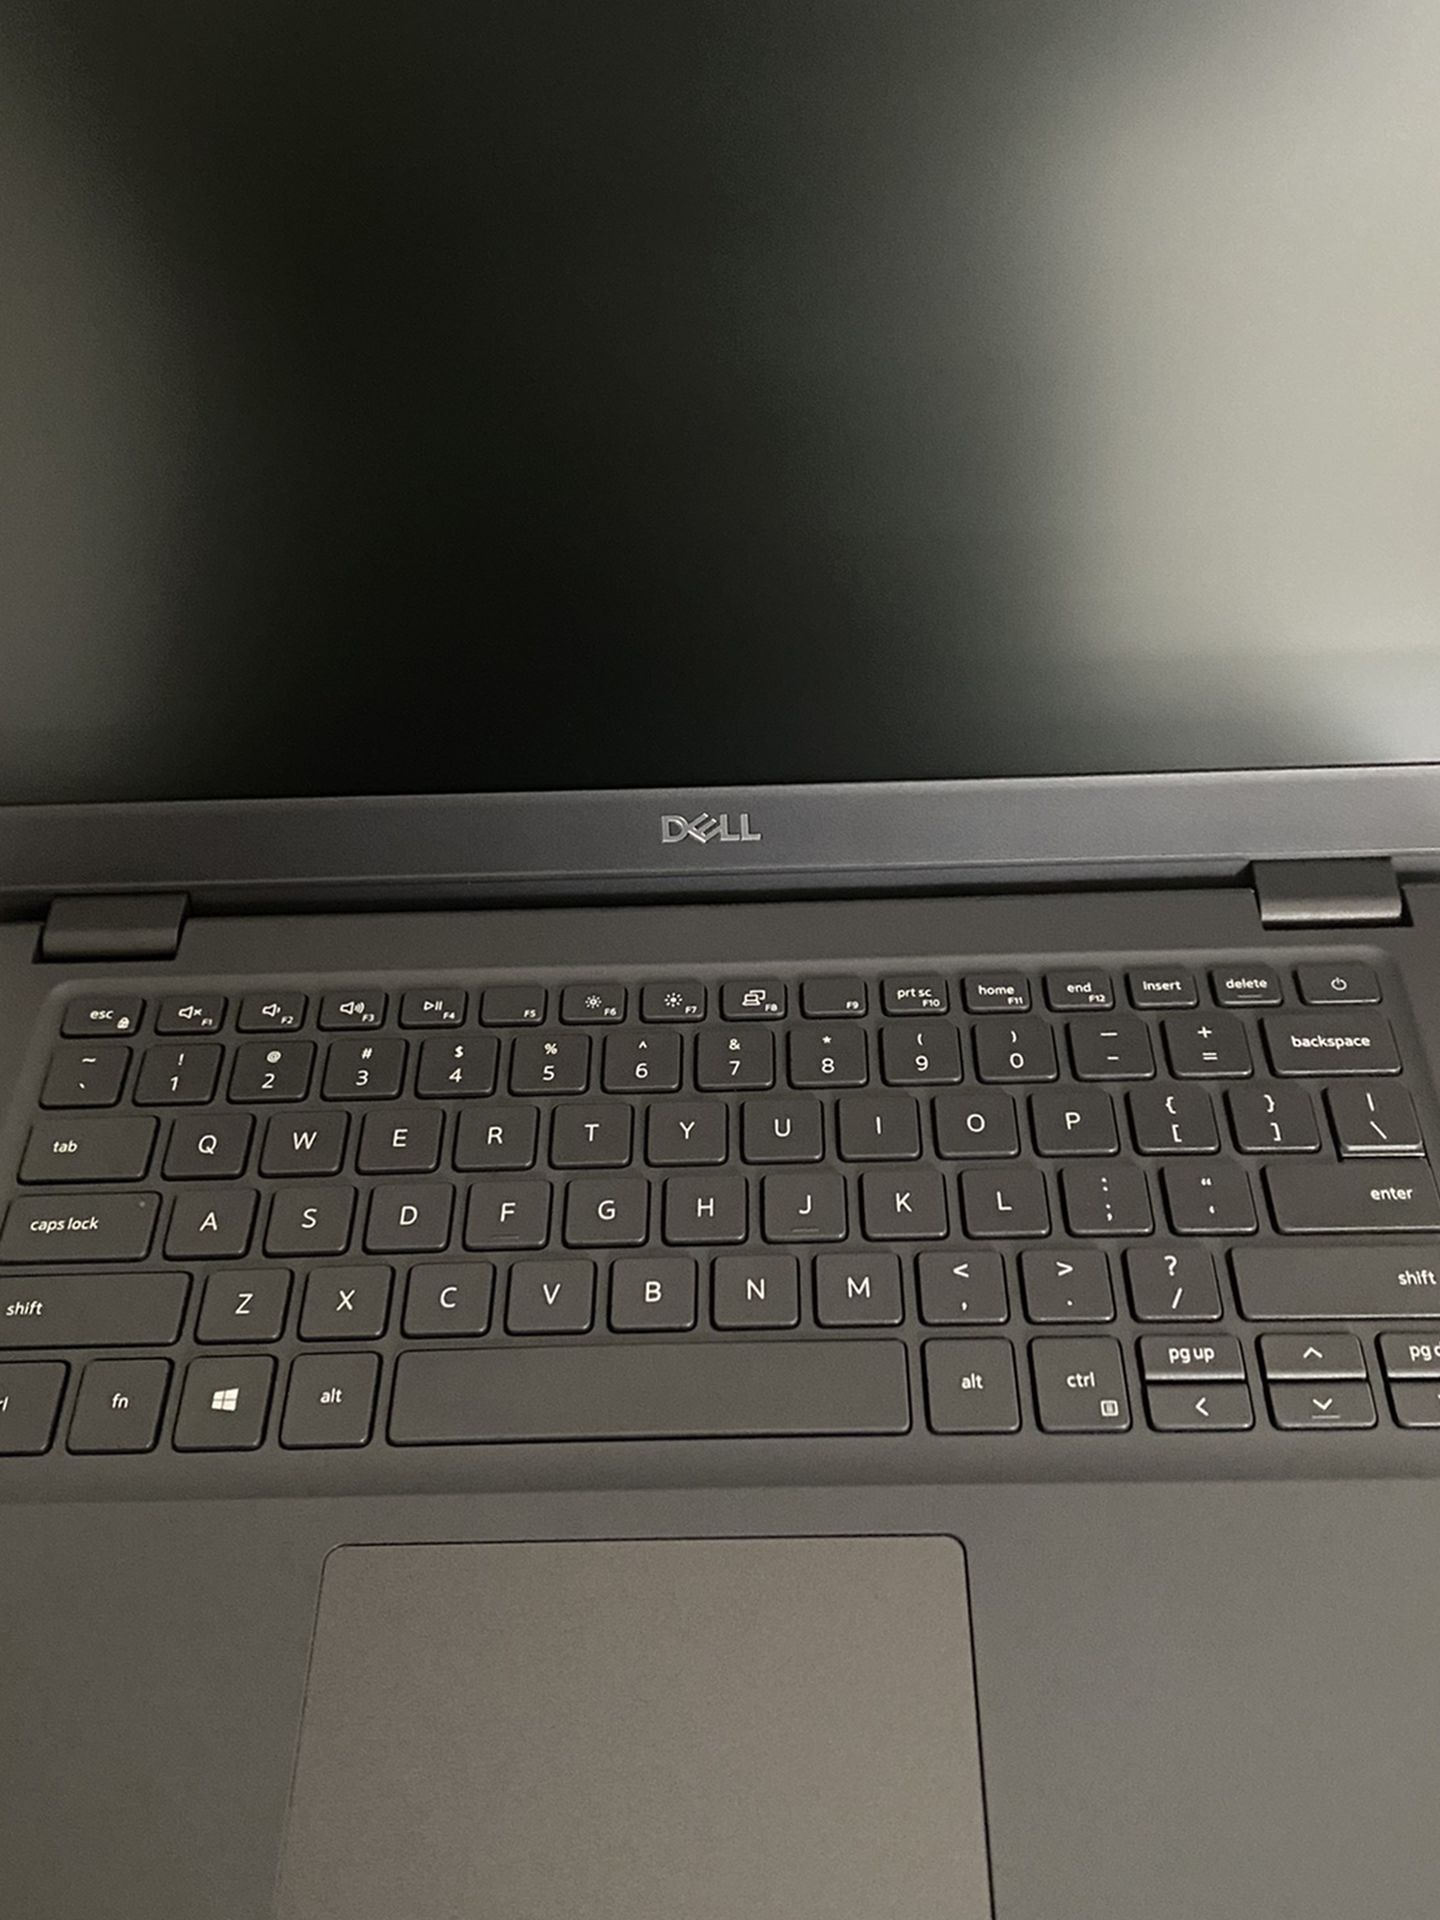 Dell laptop Brand New Never Used